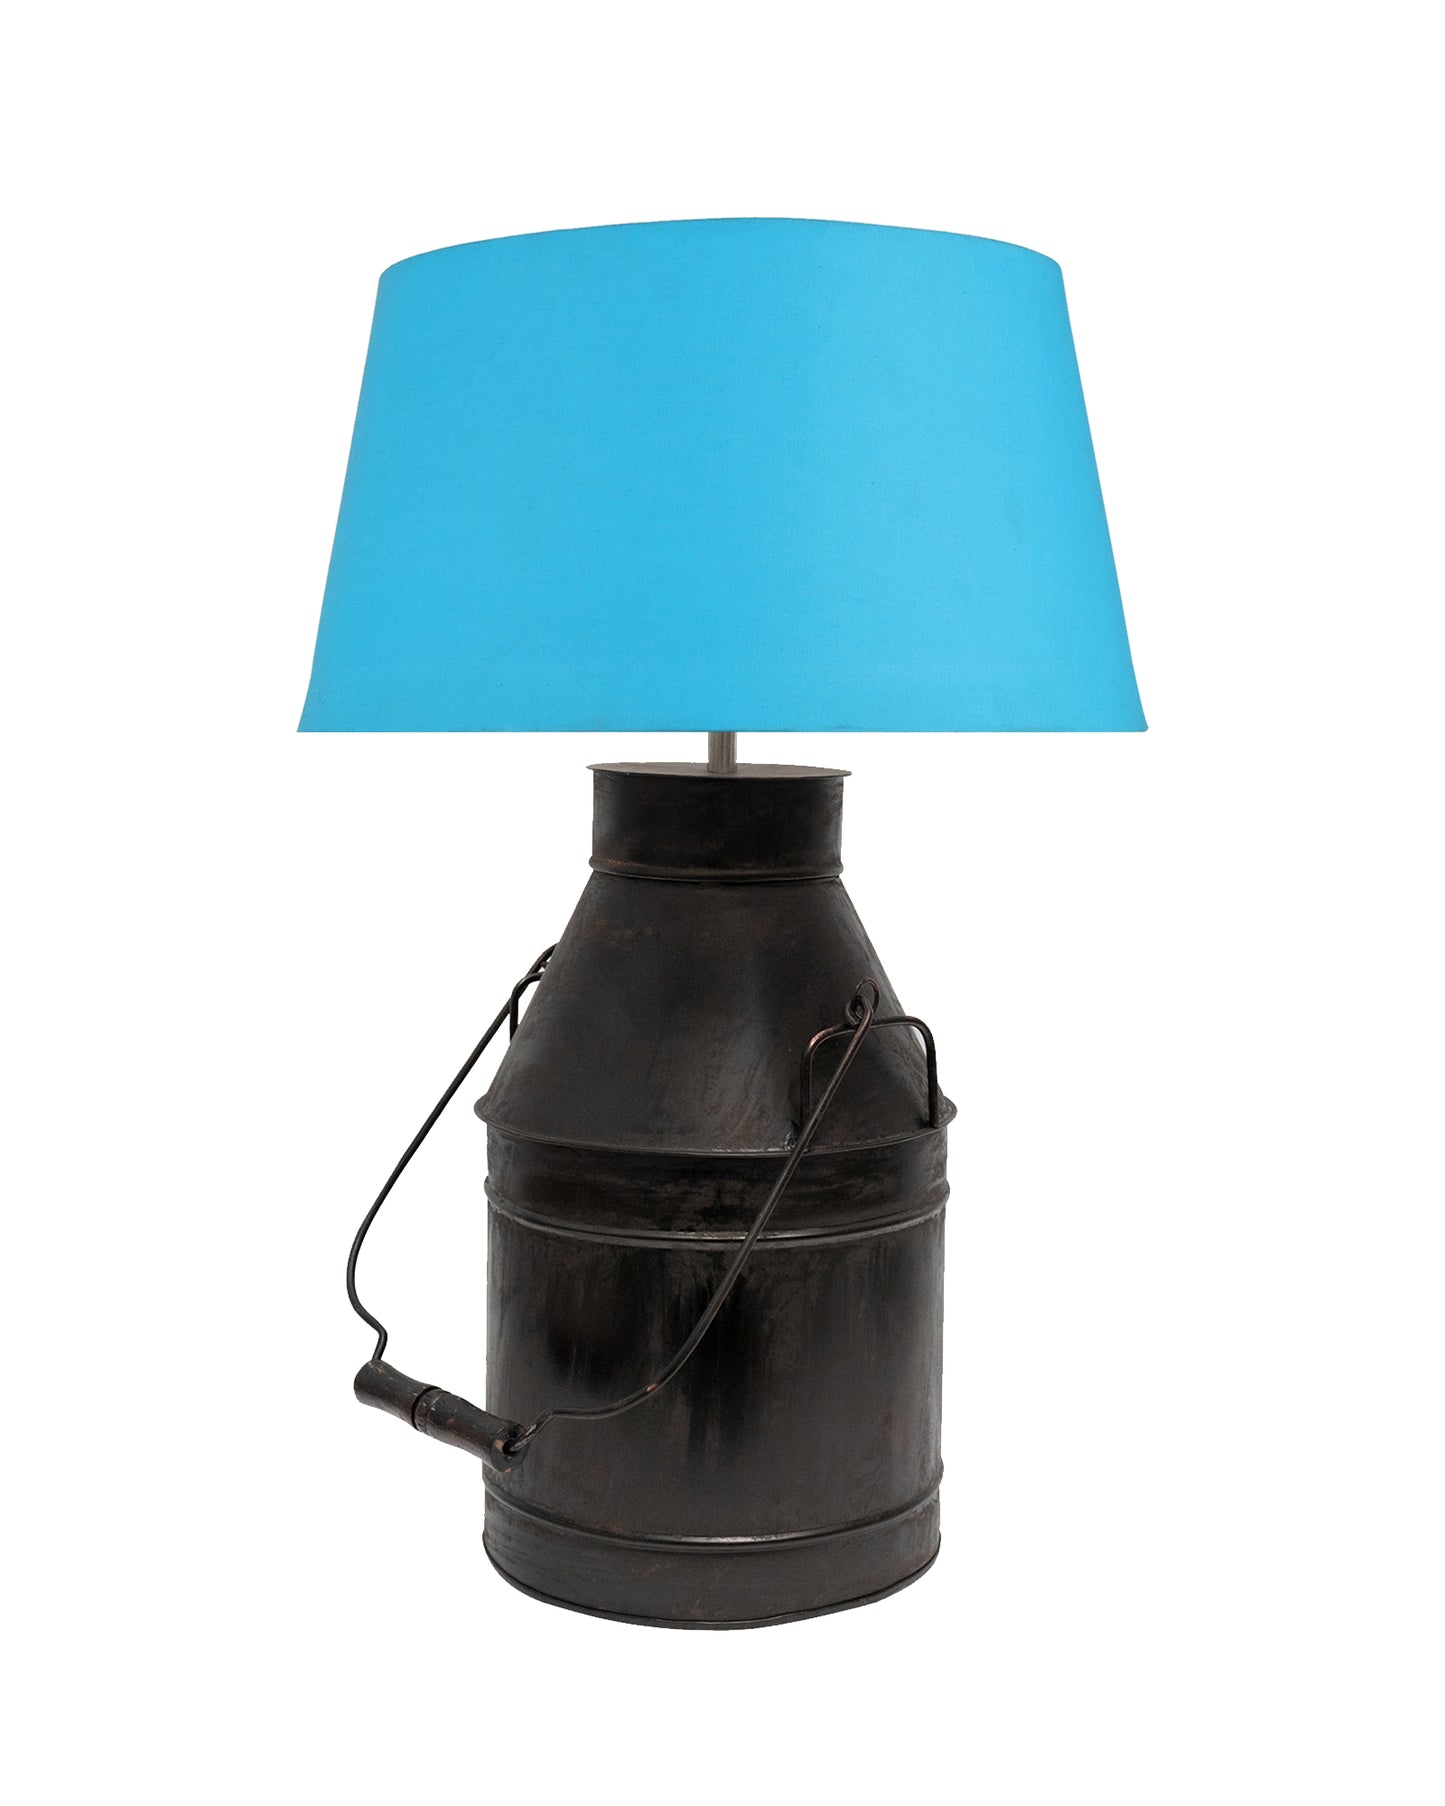 Rustic Milk Churn Can Table Lamp with shade, Black Rust Finish